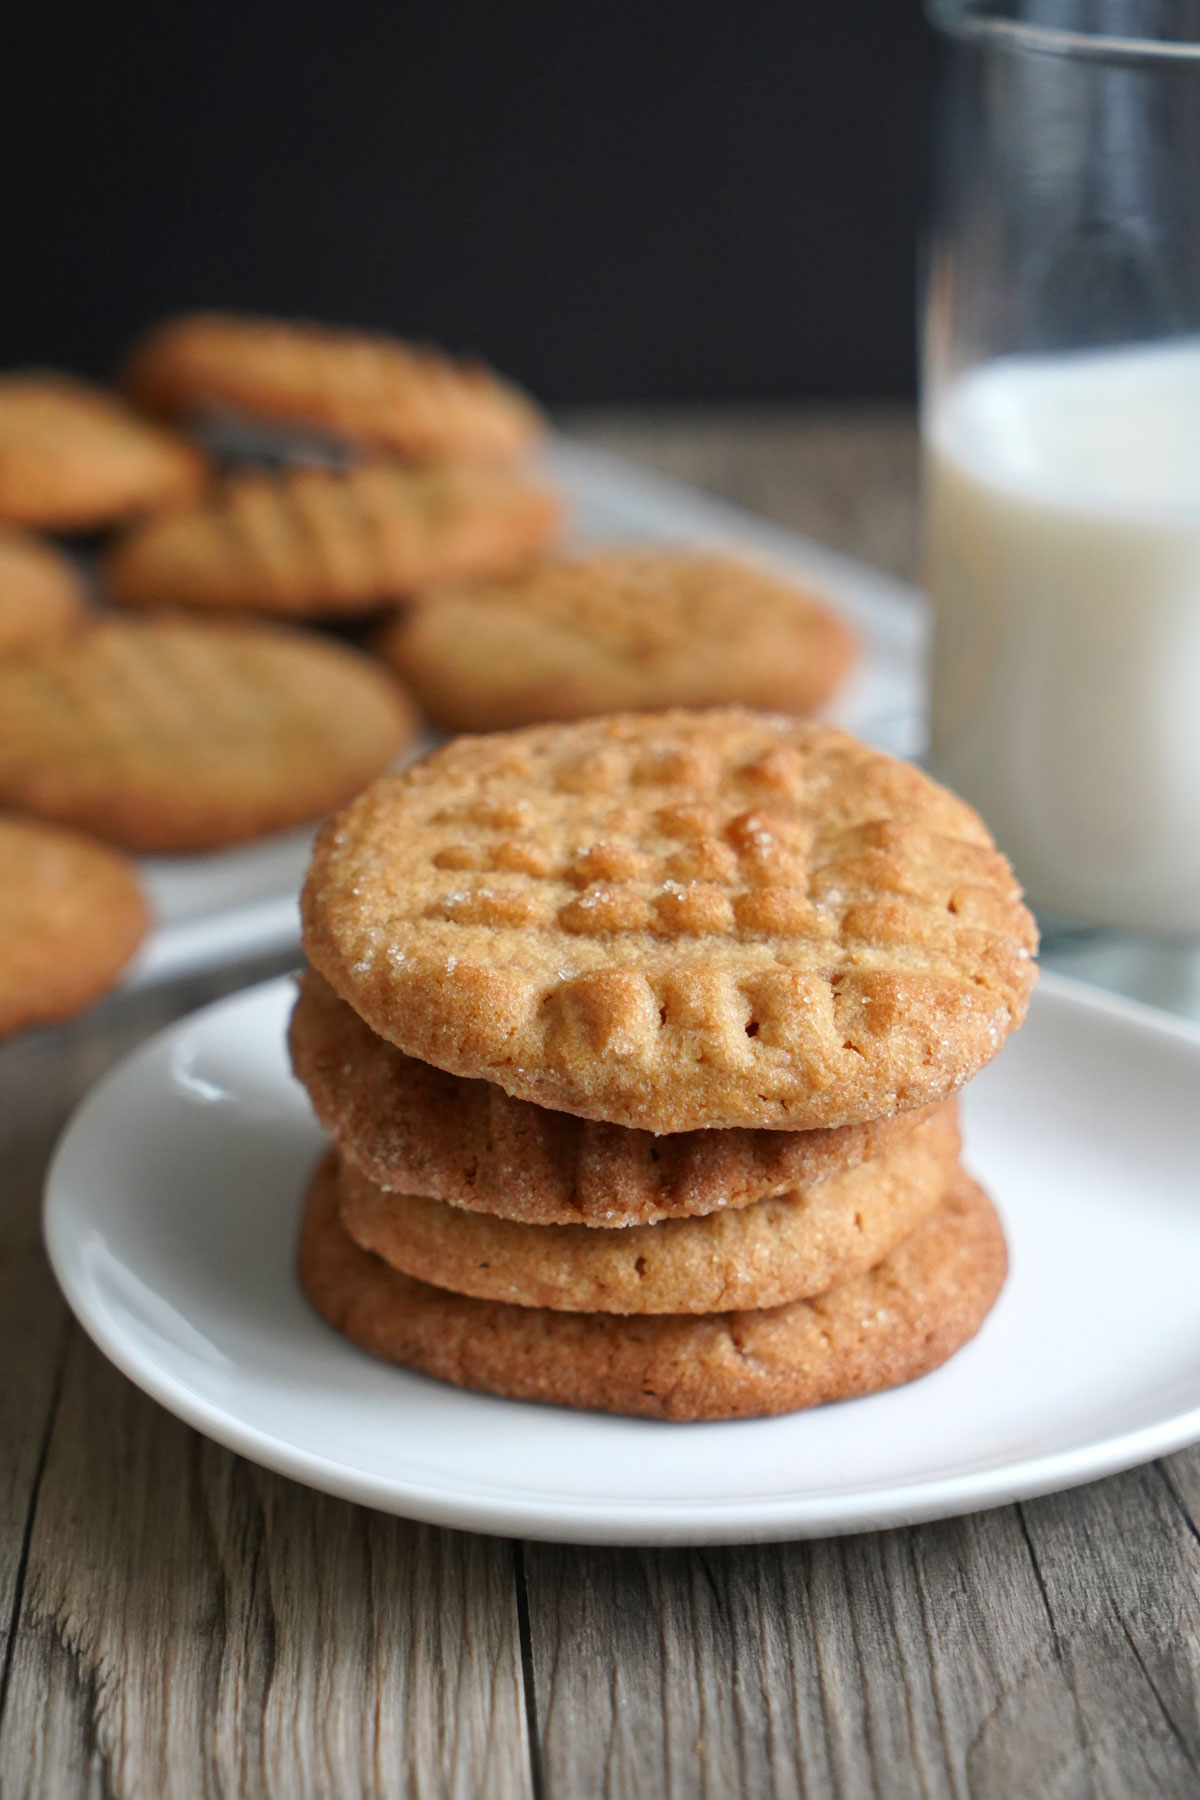 Stacked peanut butter cookies in awhite plate with milk in background.